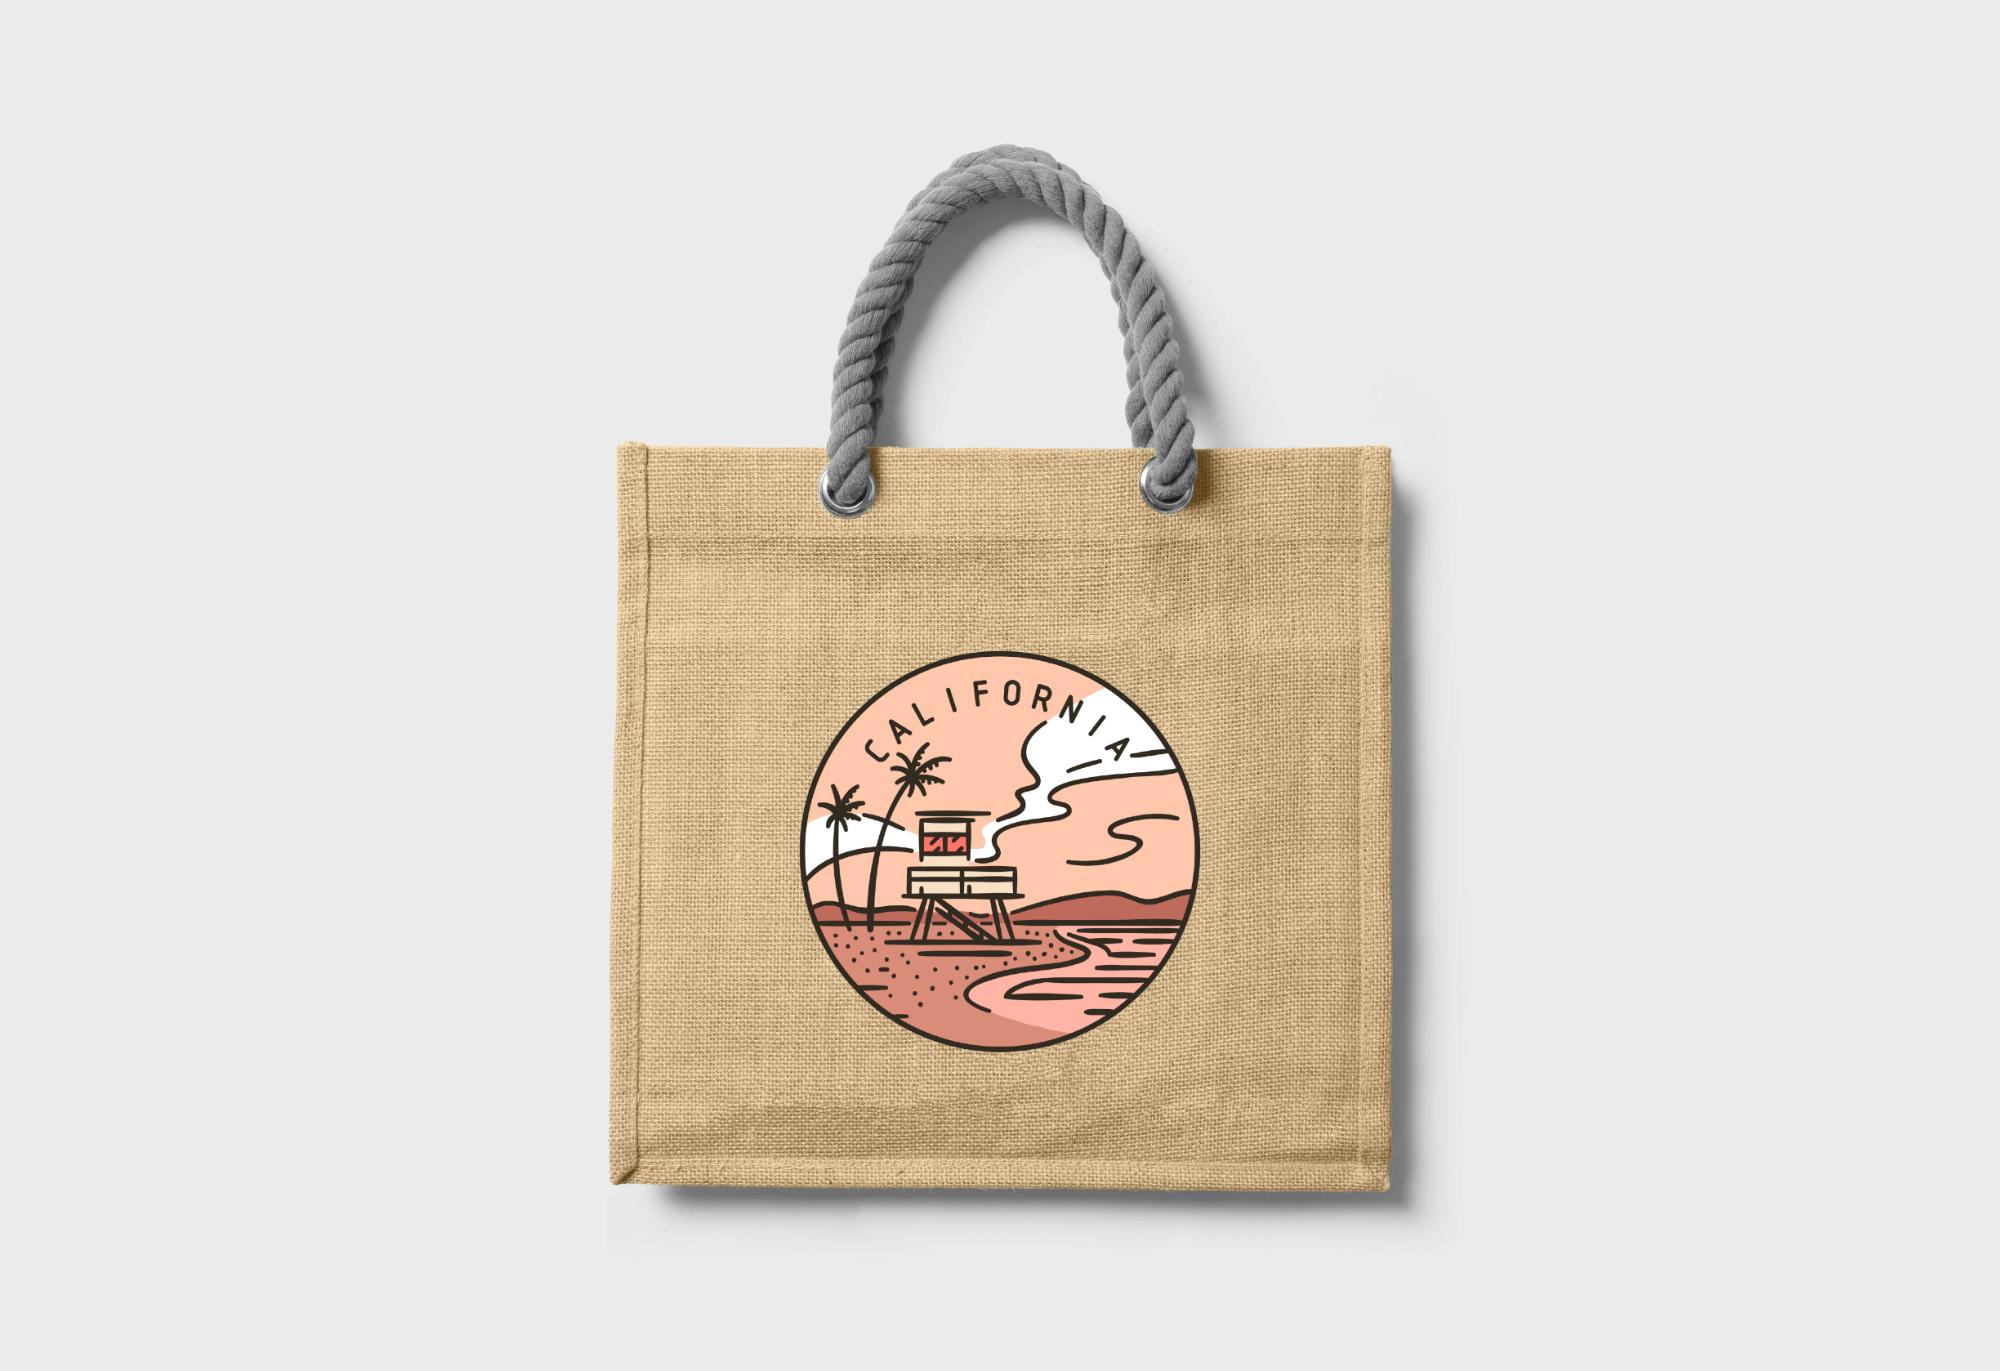 Customized canvas bag printed with a round California decal